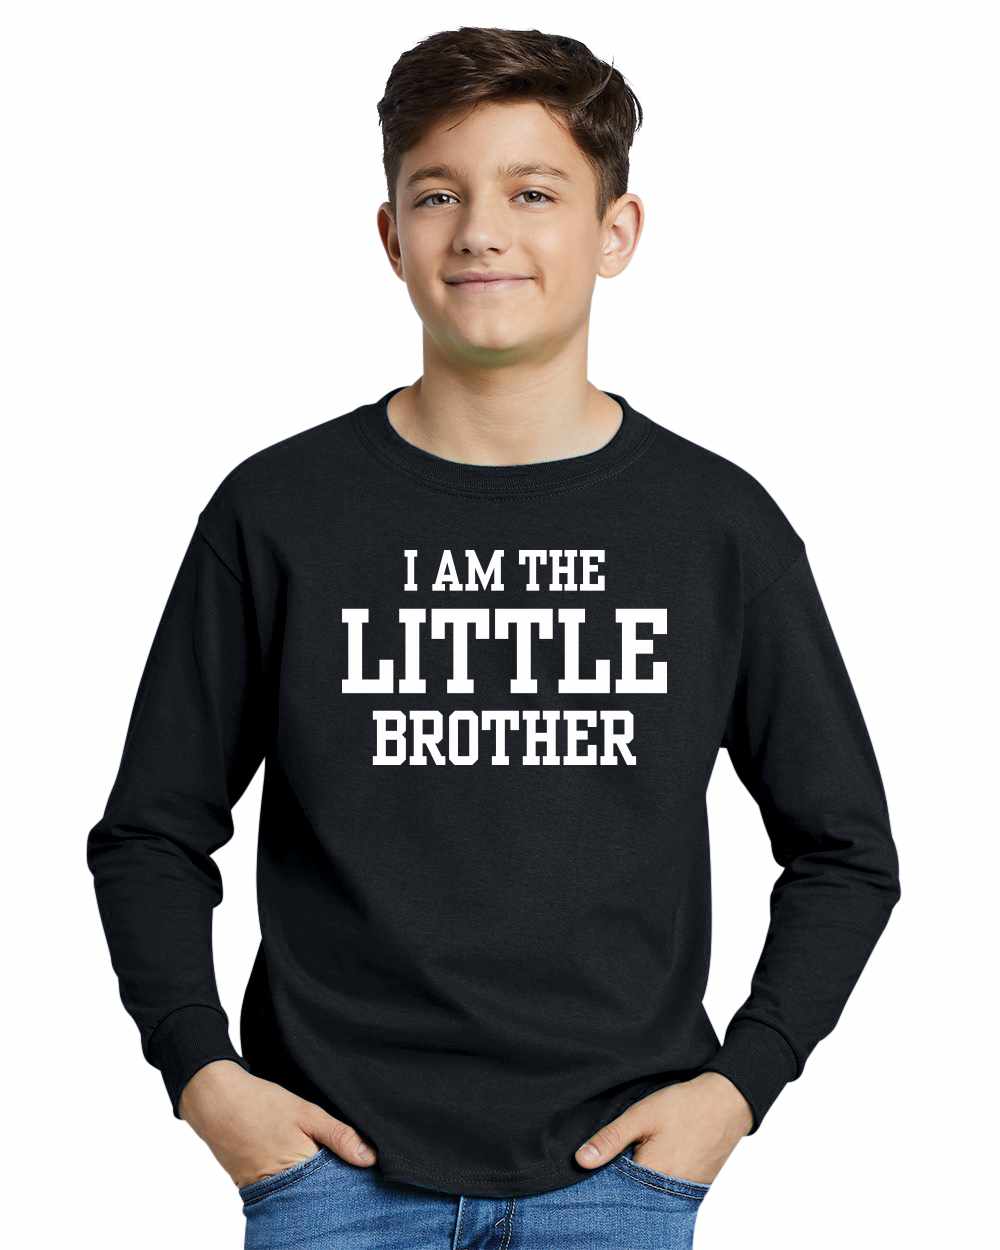 I AM The Little Brother on Youth Long Sleeve Shirt (#1153-203)